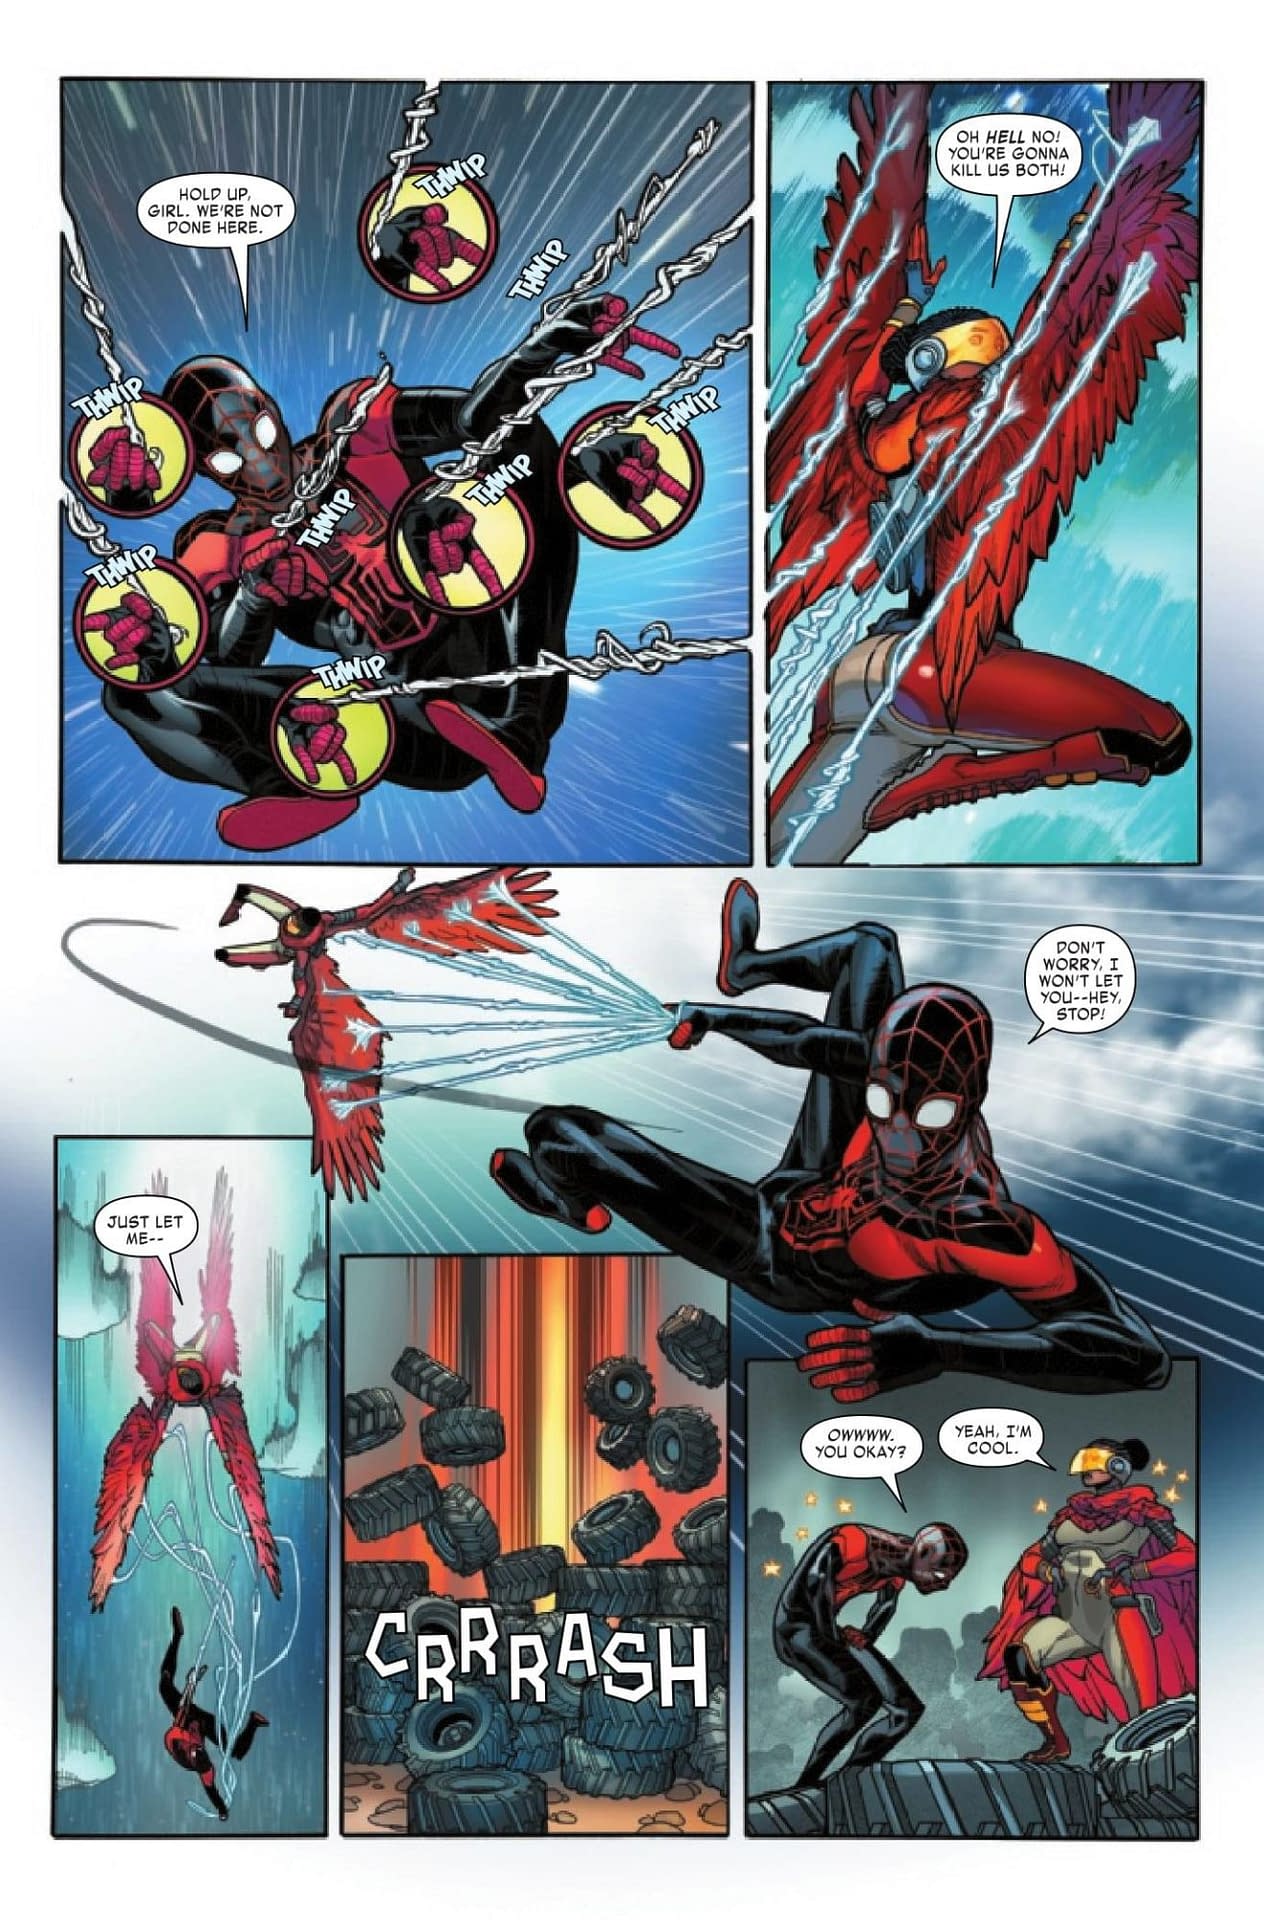 Love is in the Air in Miles Morales: Spider-Man #6